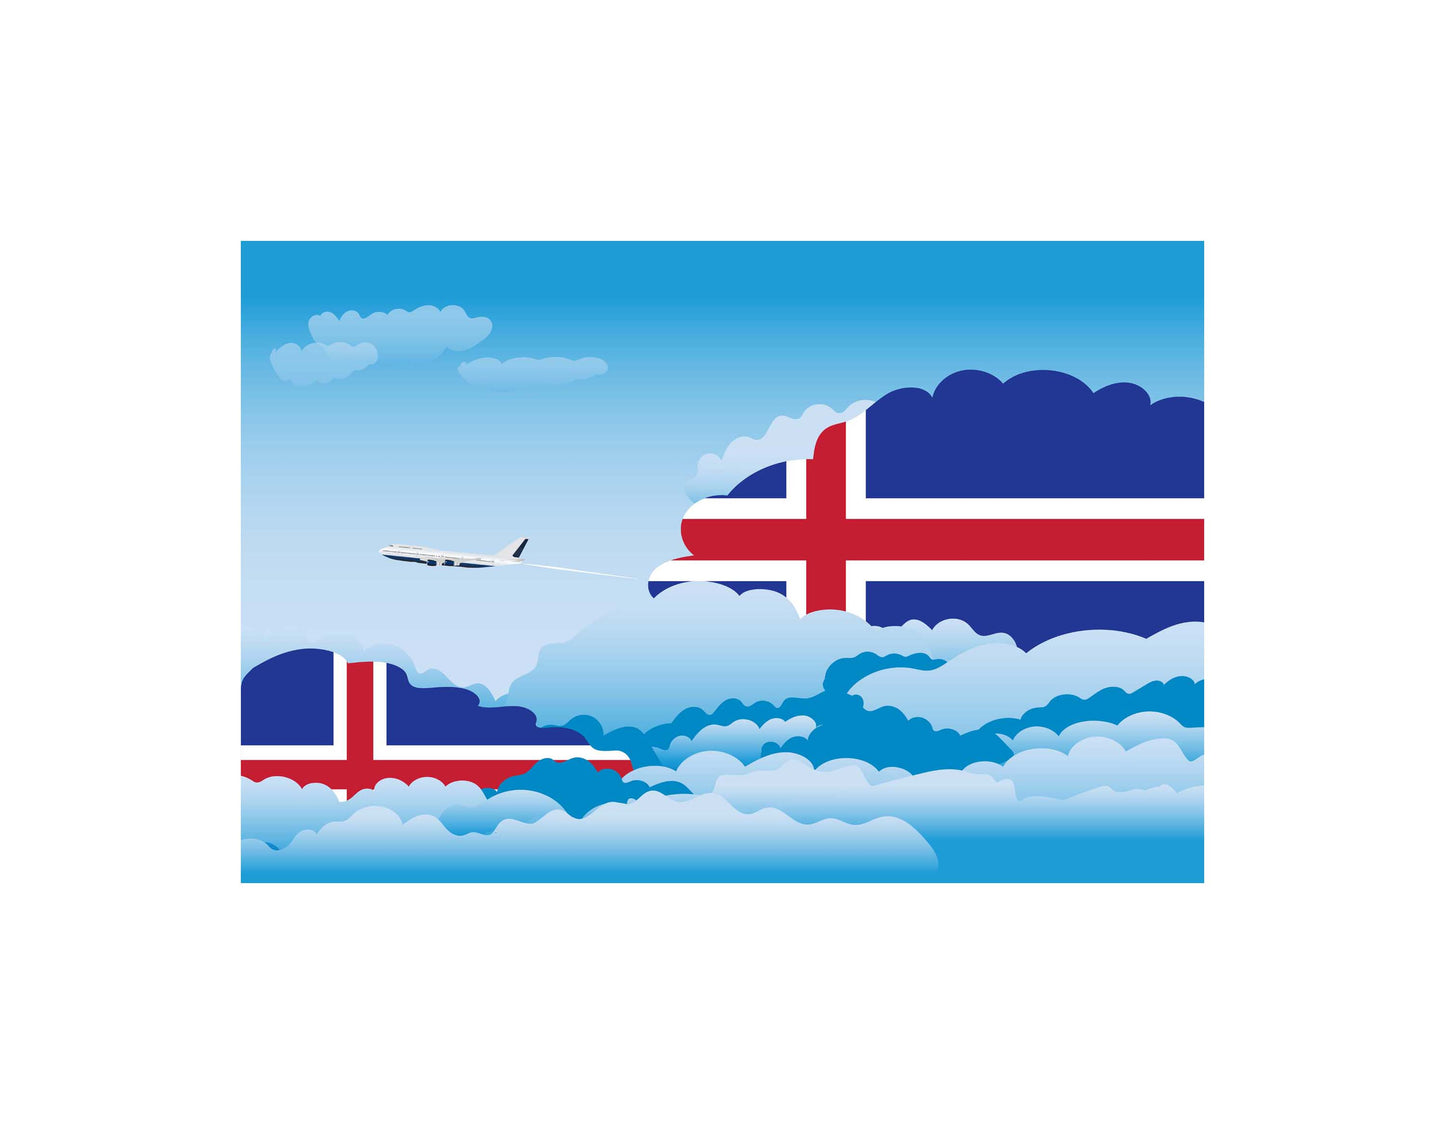 Iceland Flag Day Clouds Aeroplane Airport Flying Vector Illustration